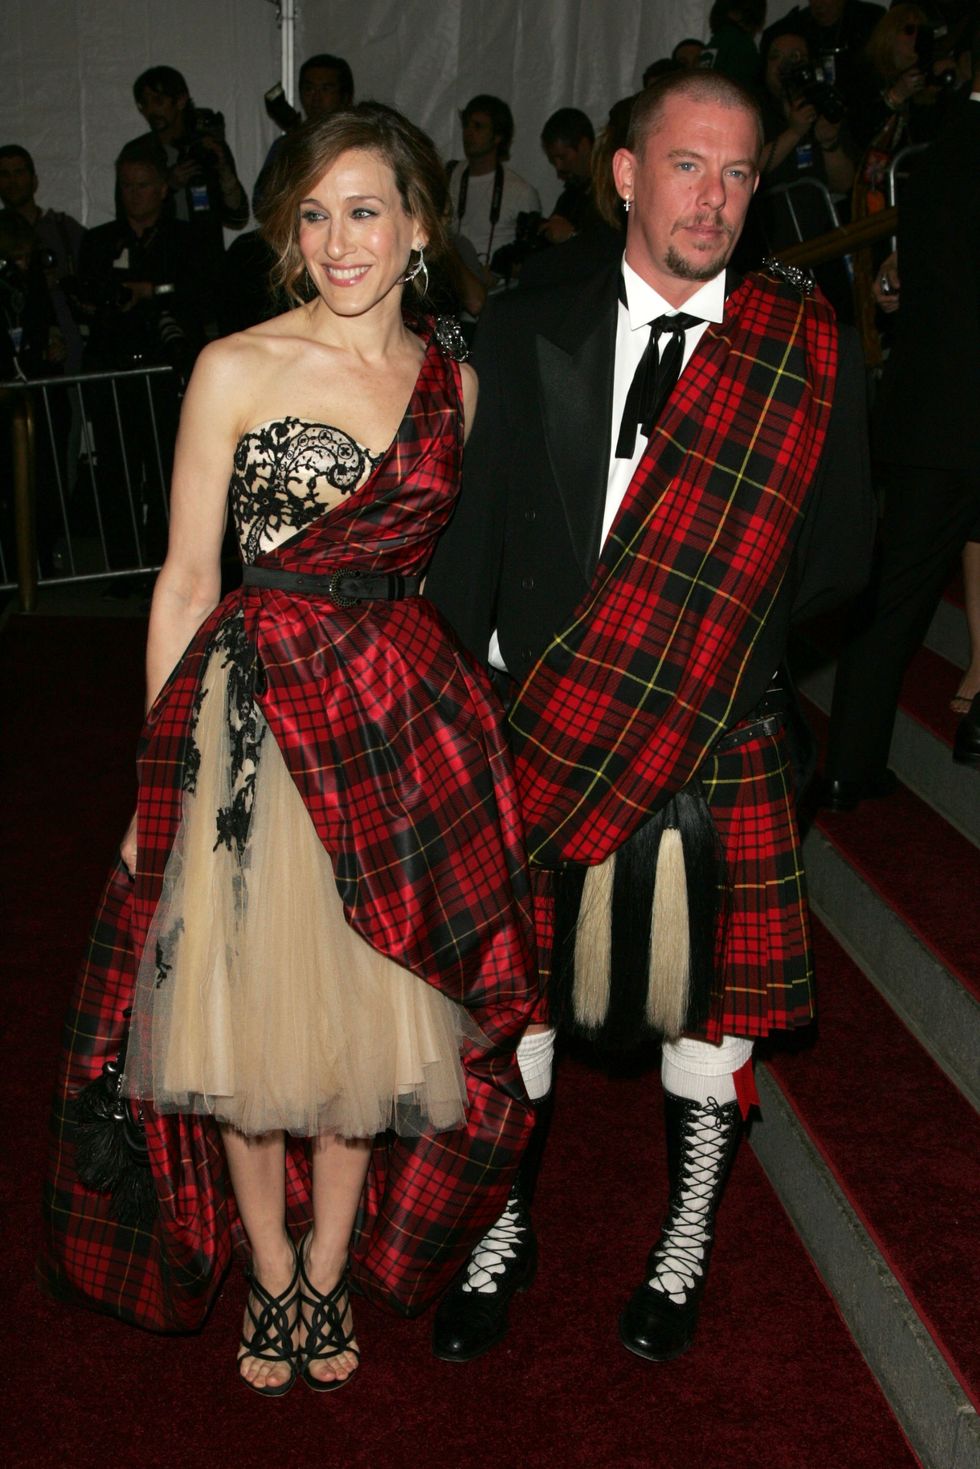 new york may 01 actress sarah jessica parker and designer alexander mcqueen attend the metropolitan museum of art costume institute benefit gala anglomania at the metropolitan museum of art may 1, 2006 in new york city photo by peter kramergetty images